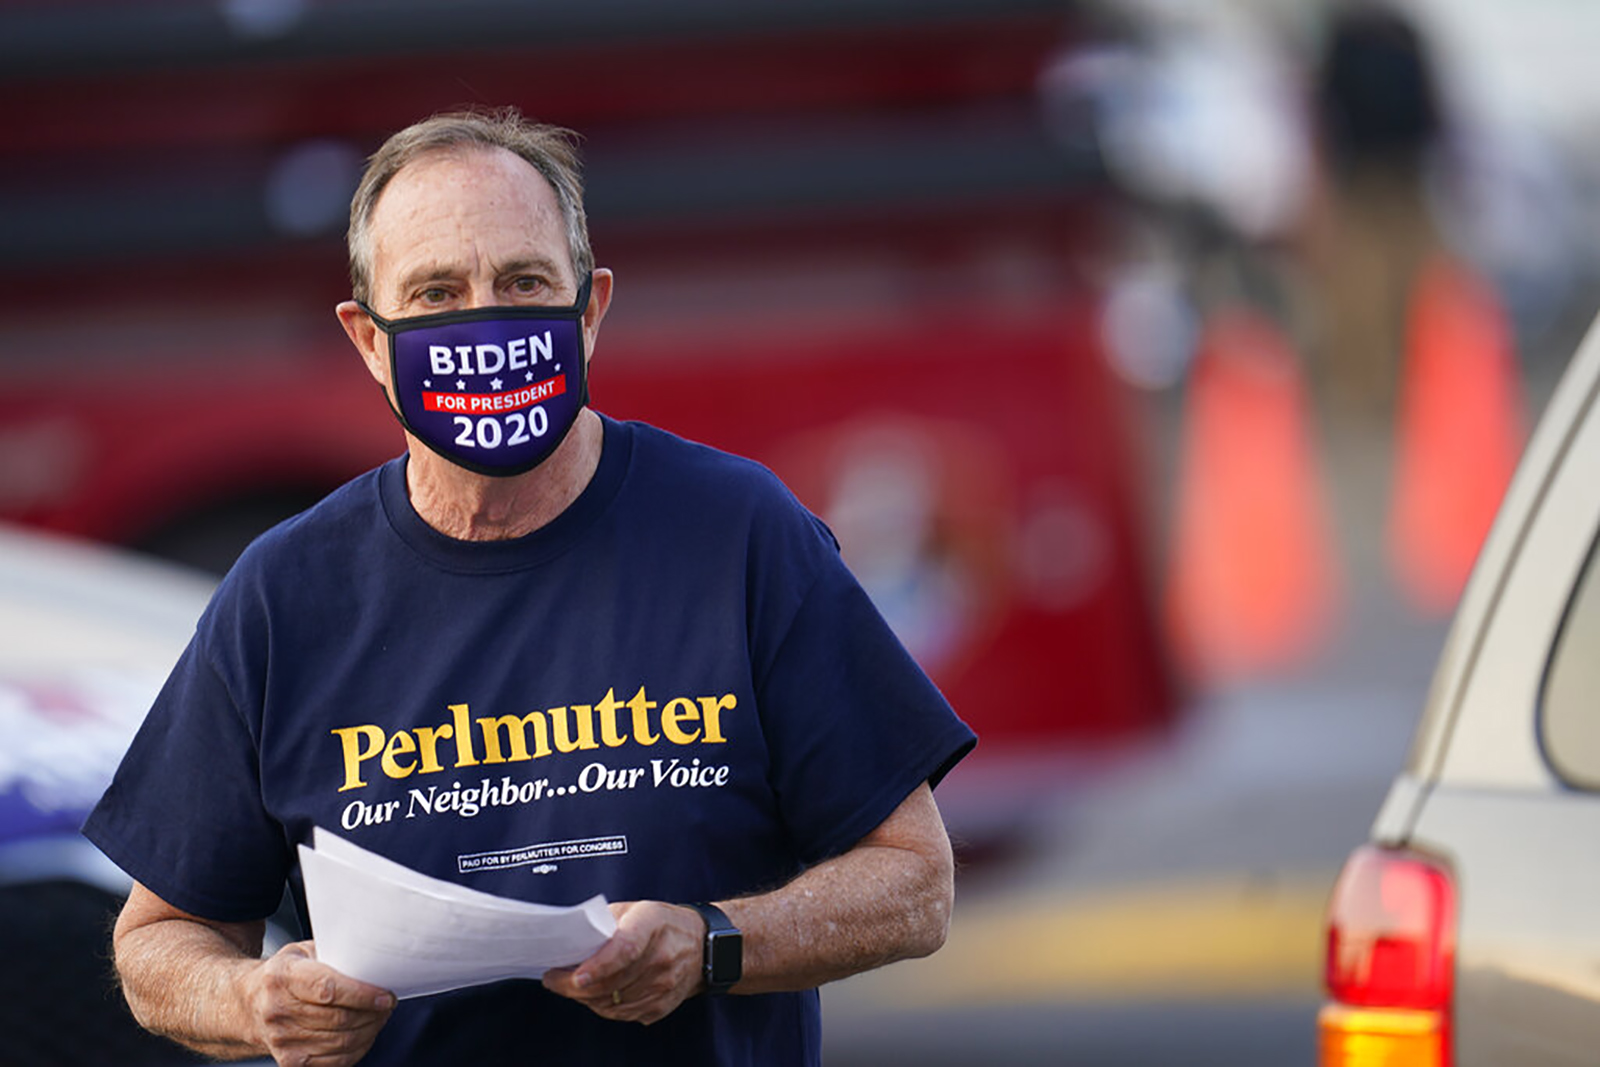 Rep. Ed Perlmutter hands out flyers during an election rally on October 8, in Denver.